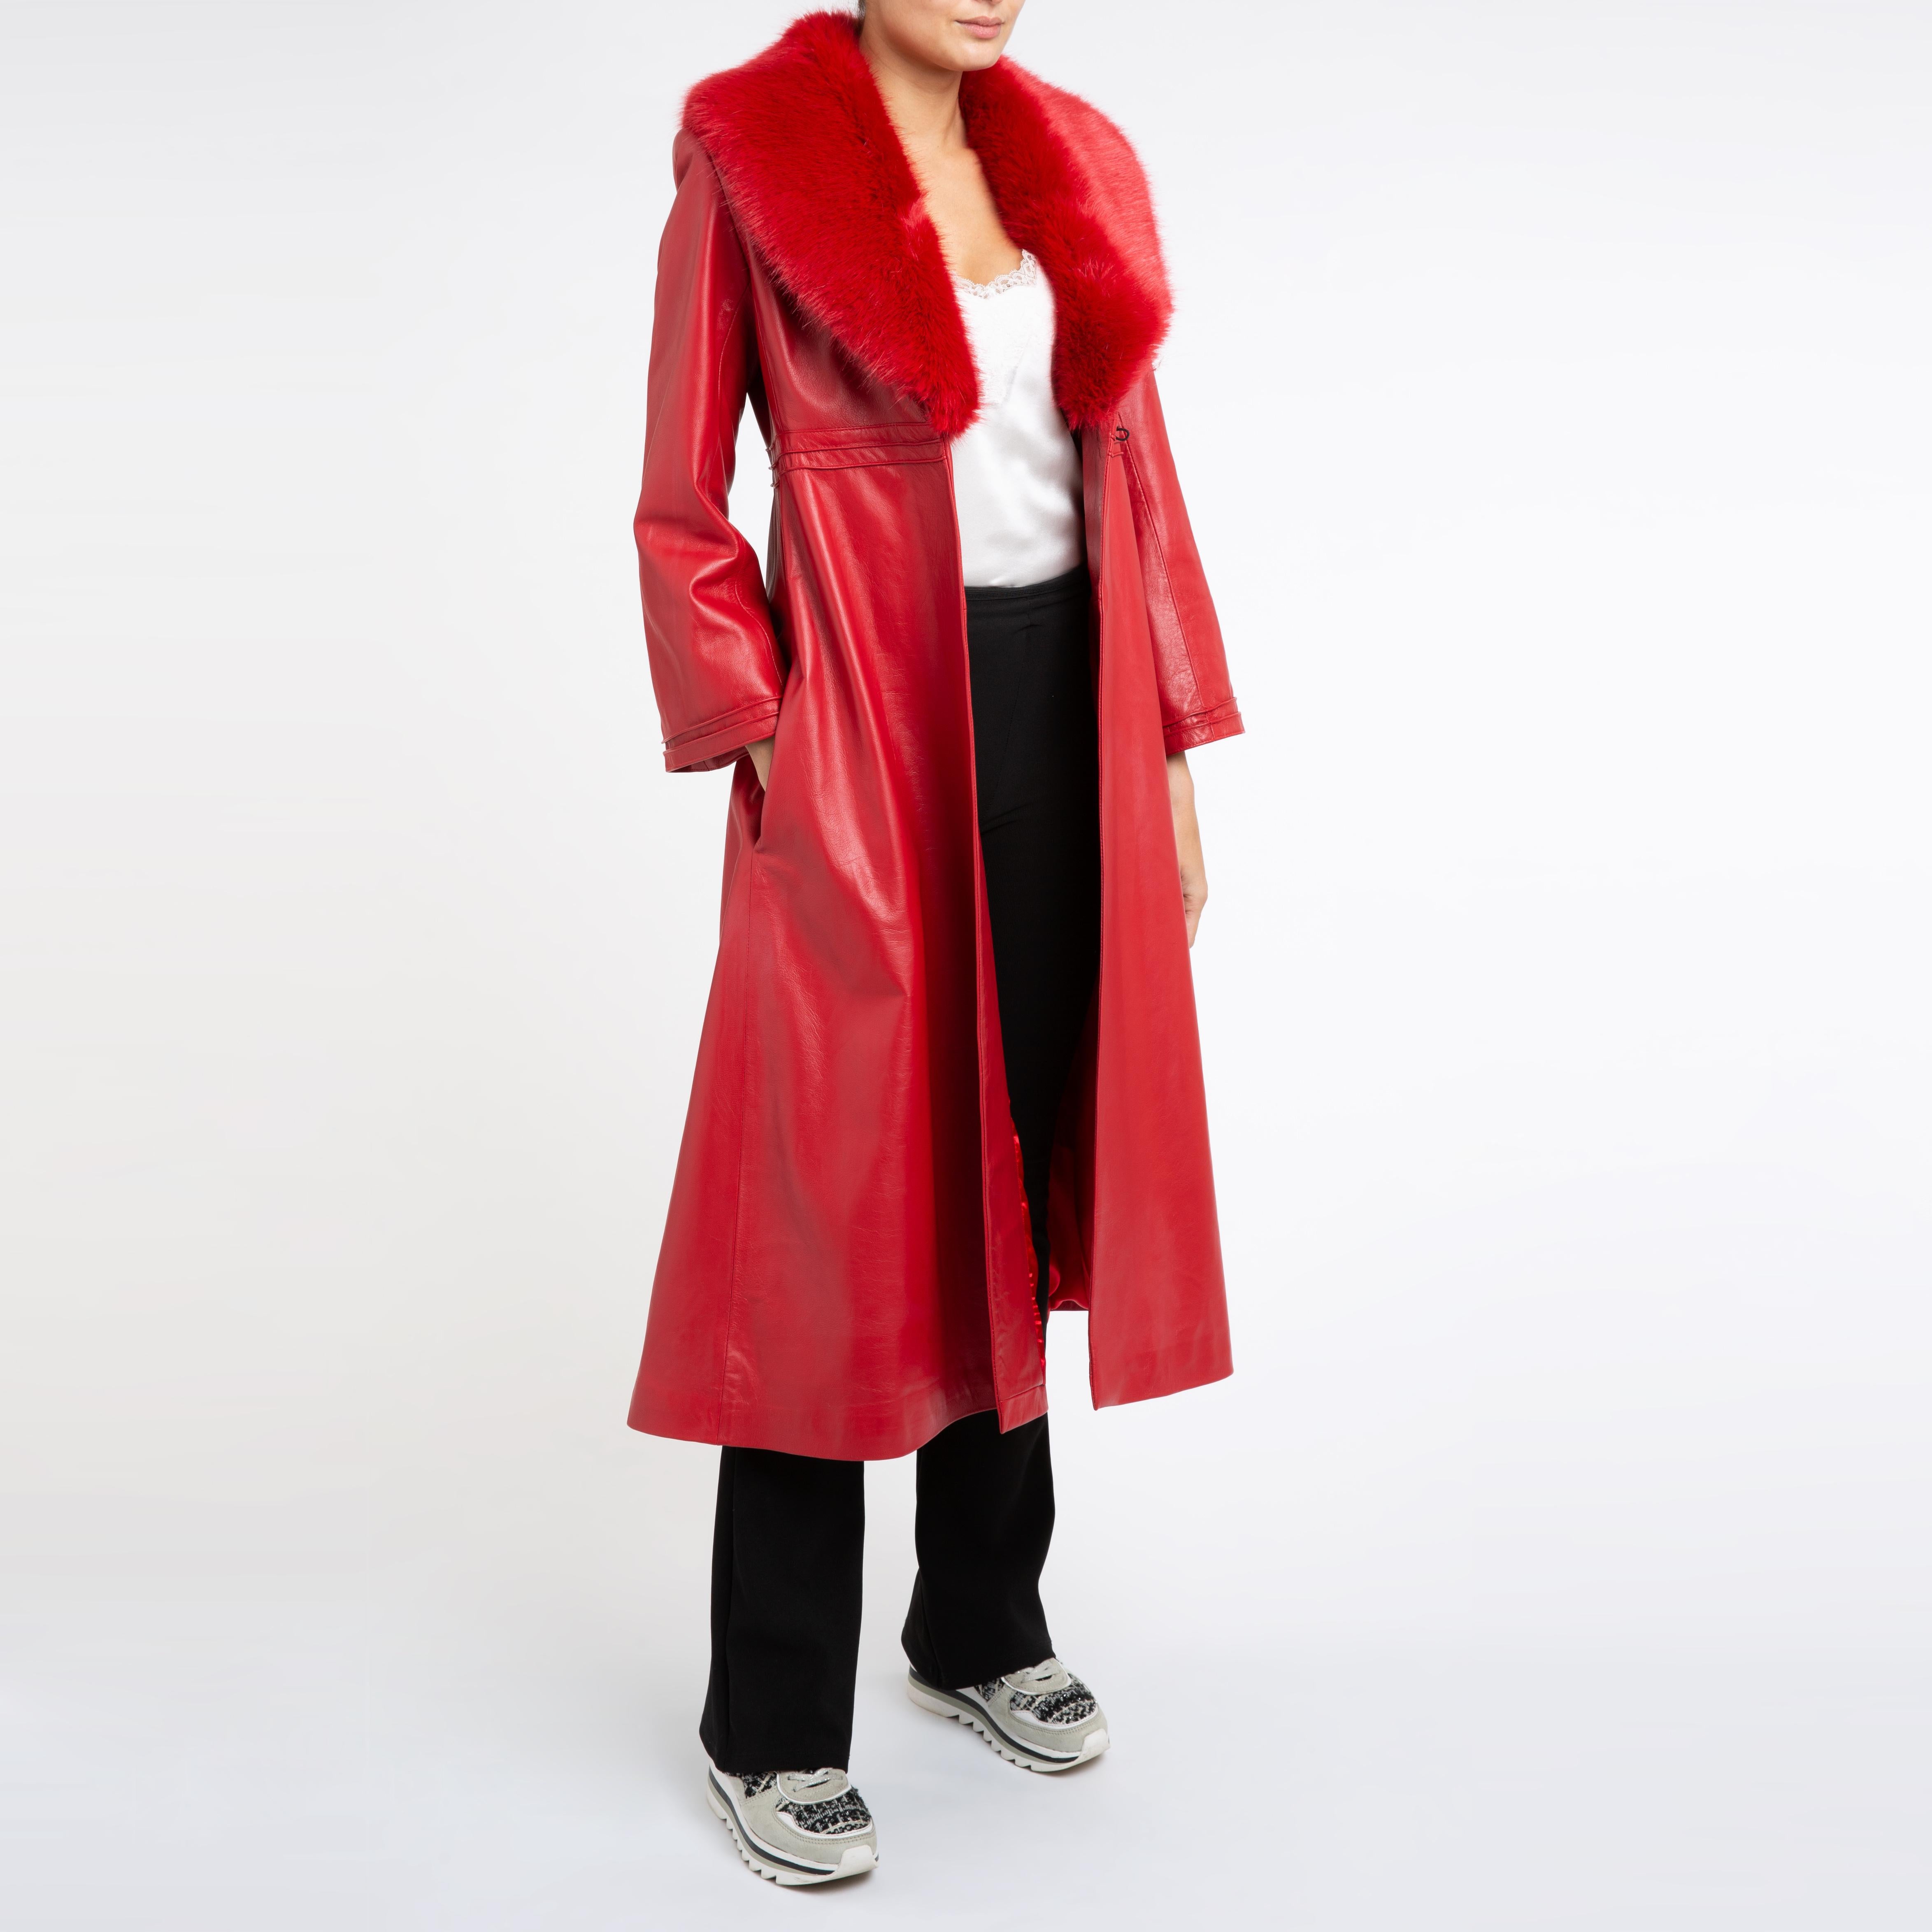 Verheyen London Edward Leather Coat with Faux Fur Collar in Red - Size uk 14 For Sale 7